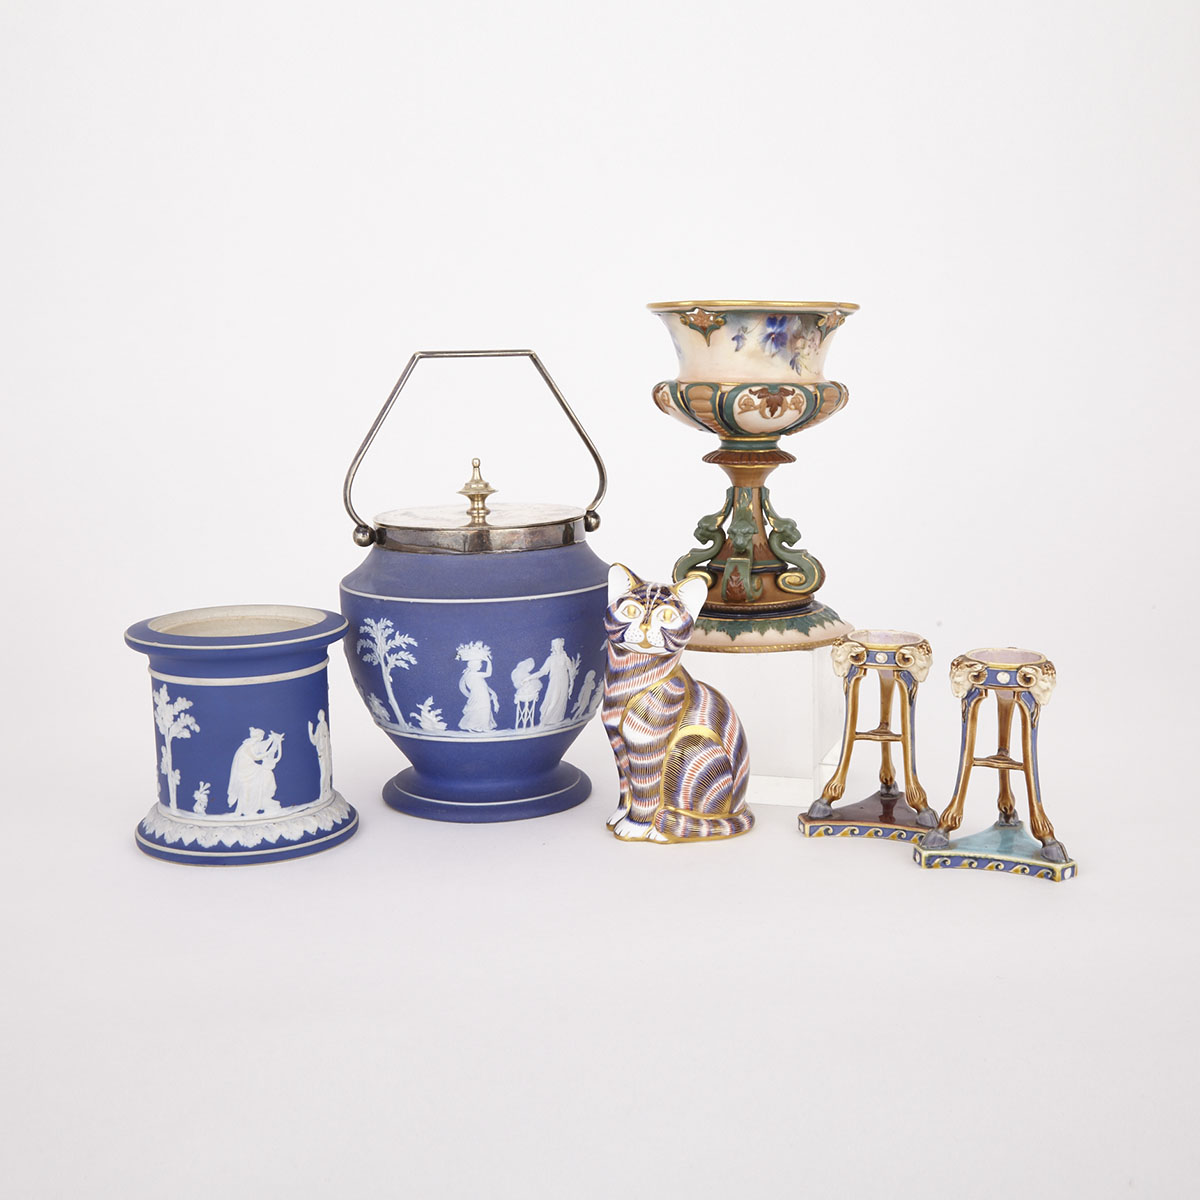 Group of English Ceramics, including Worcester, Minton, Derby and Wedgwood, late 19th/20th century